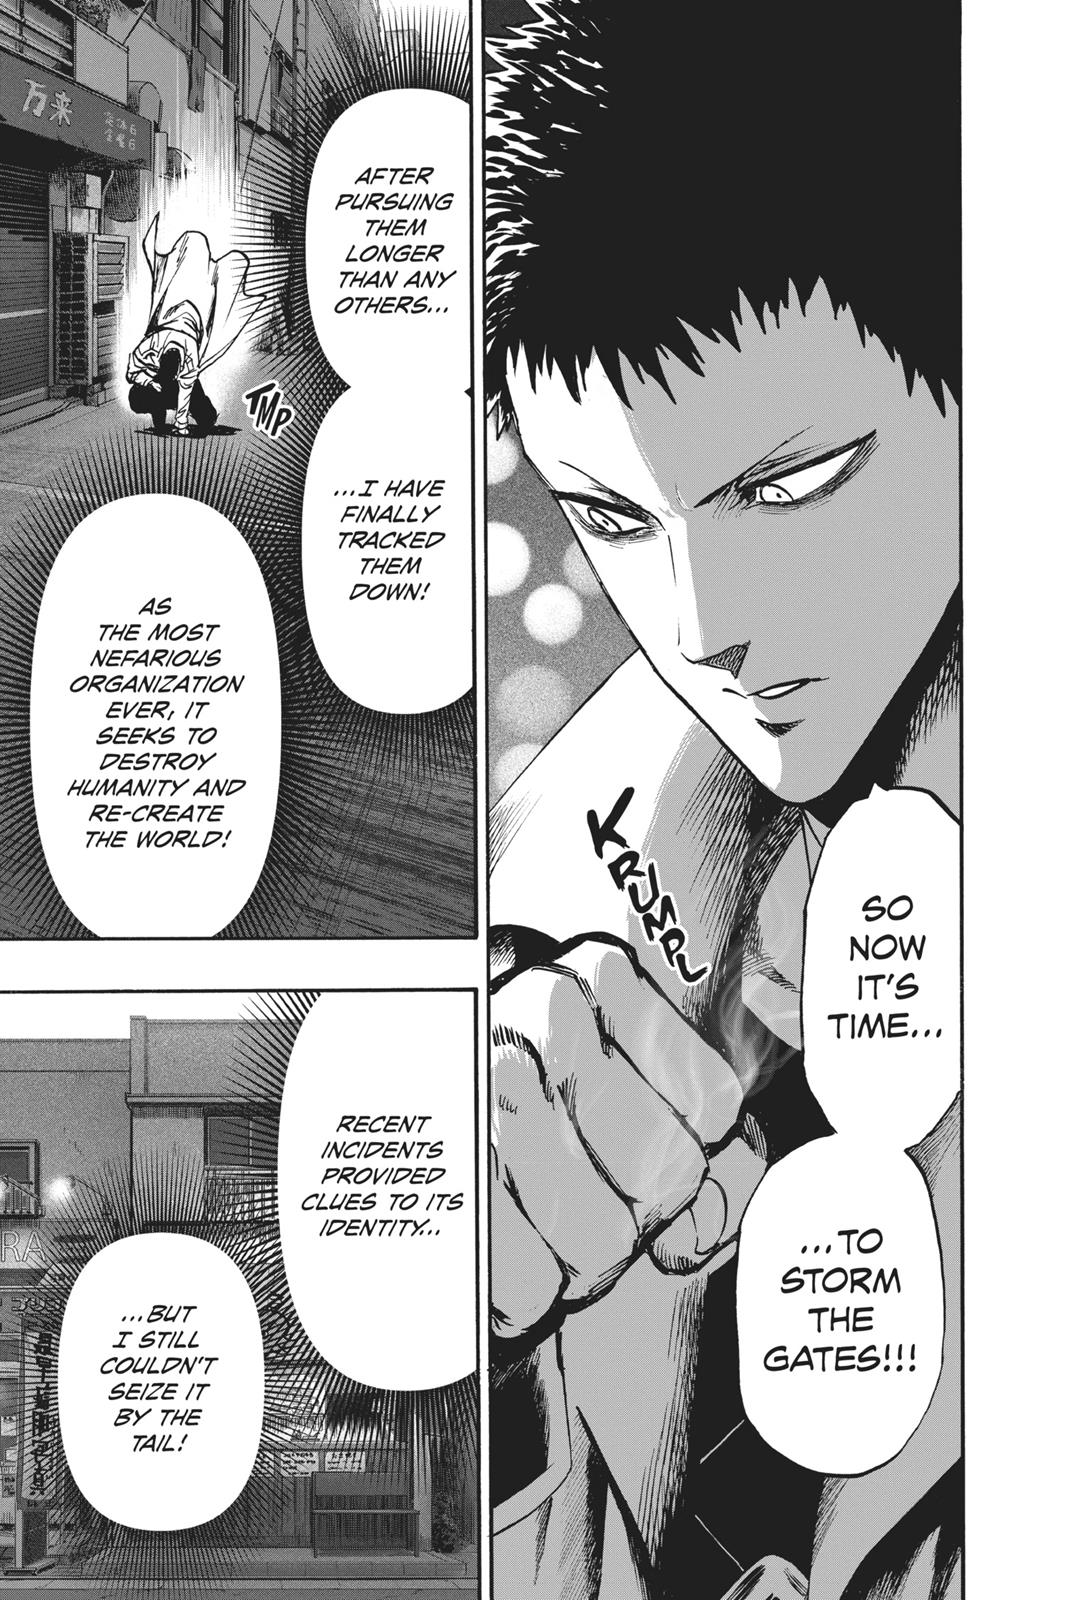 One-Punch Man, Punch 89 image 27